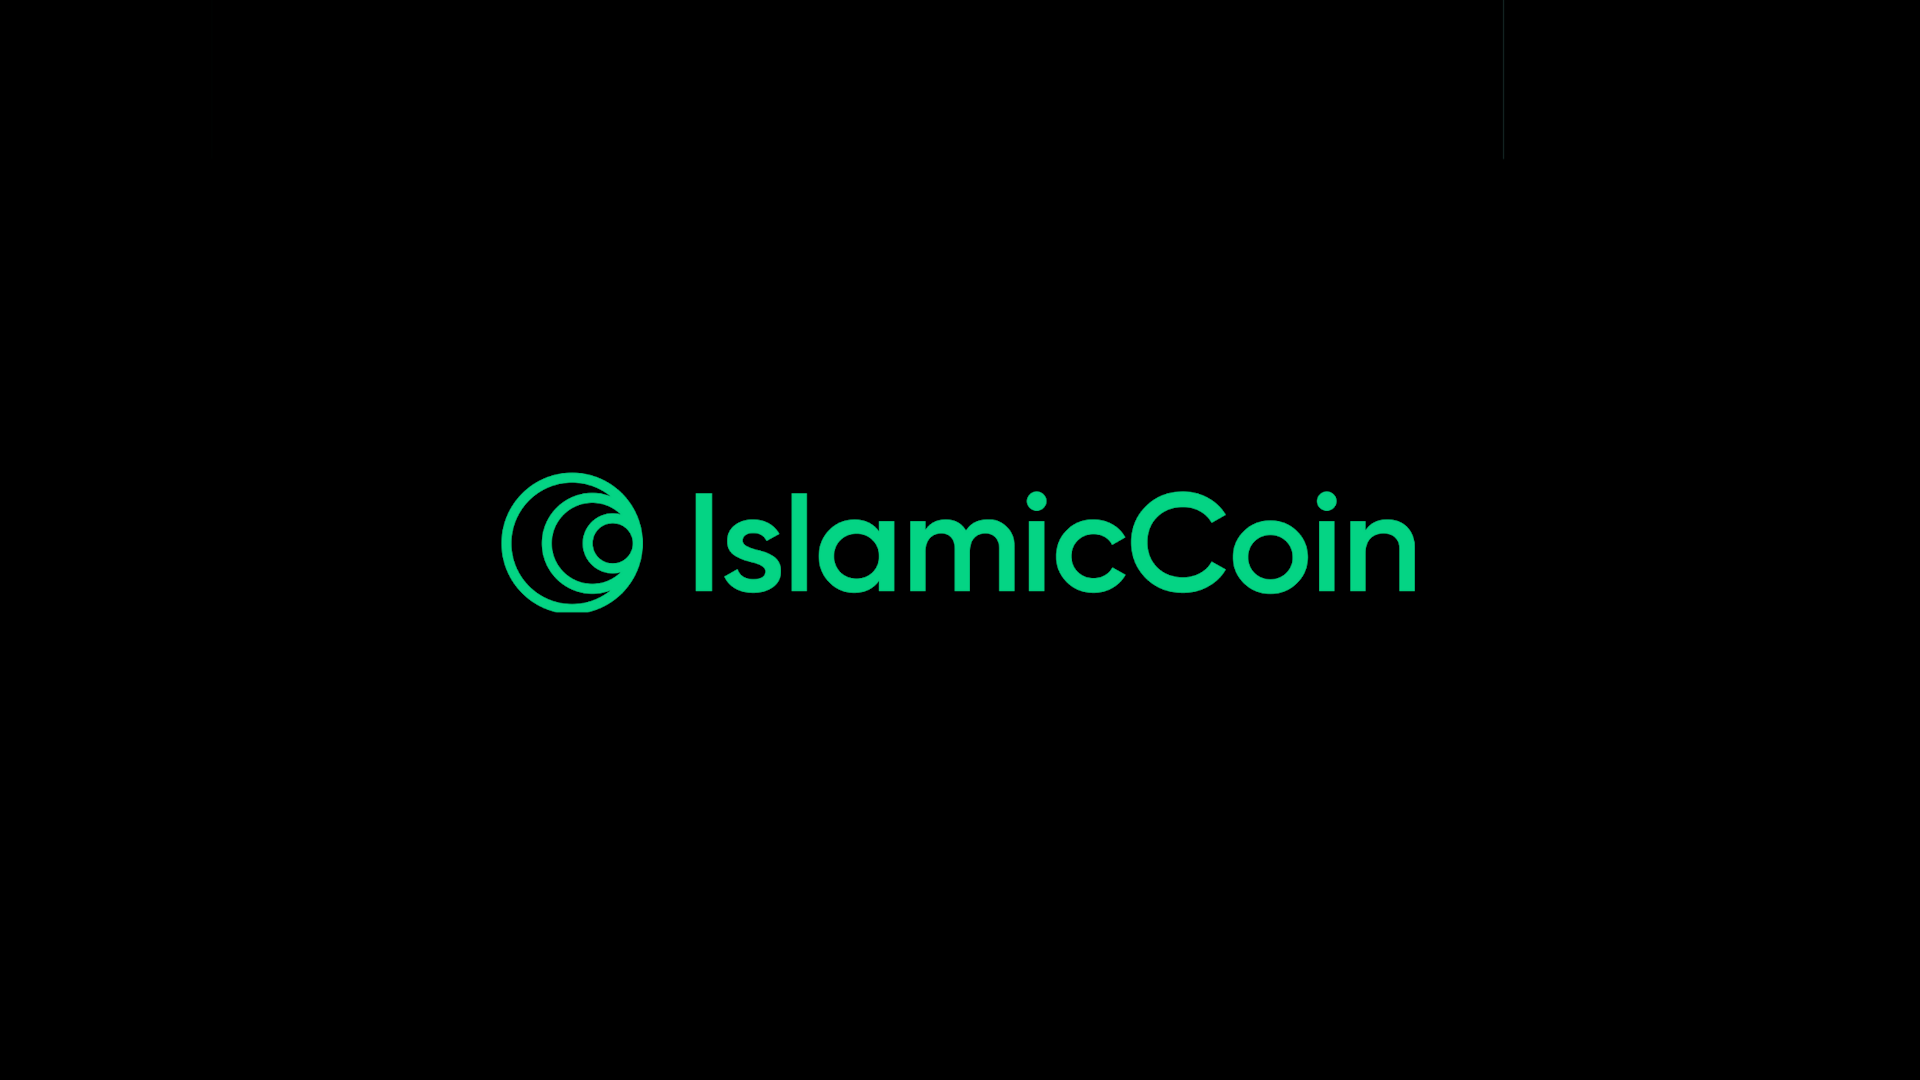 Islamic Coin and Haqq Blockchain ink major agreements in medical care, travel, wellness and immigration services